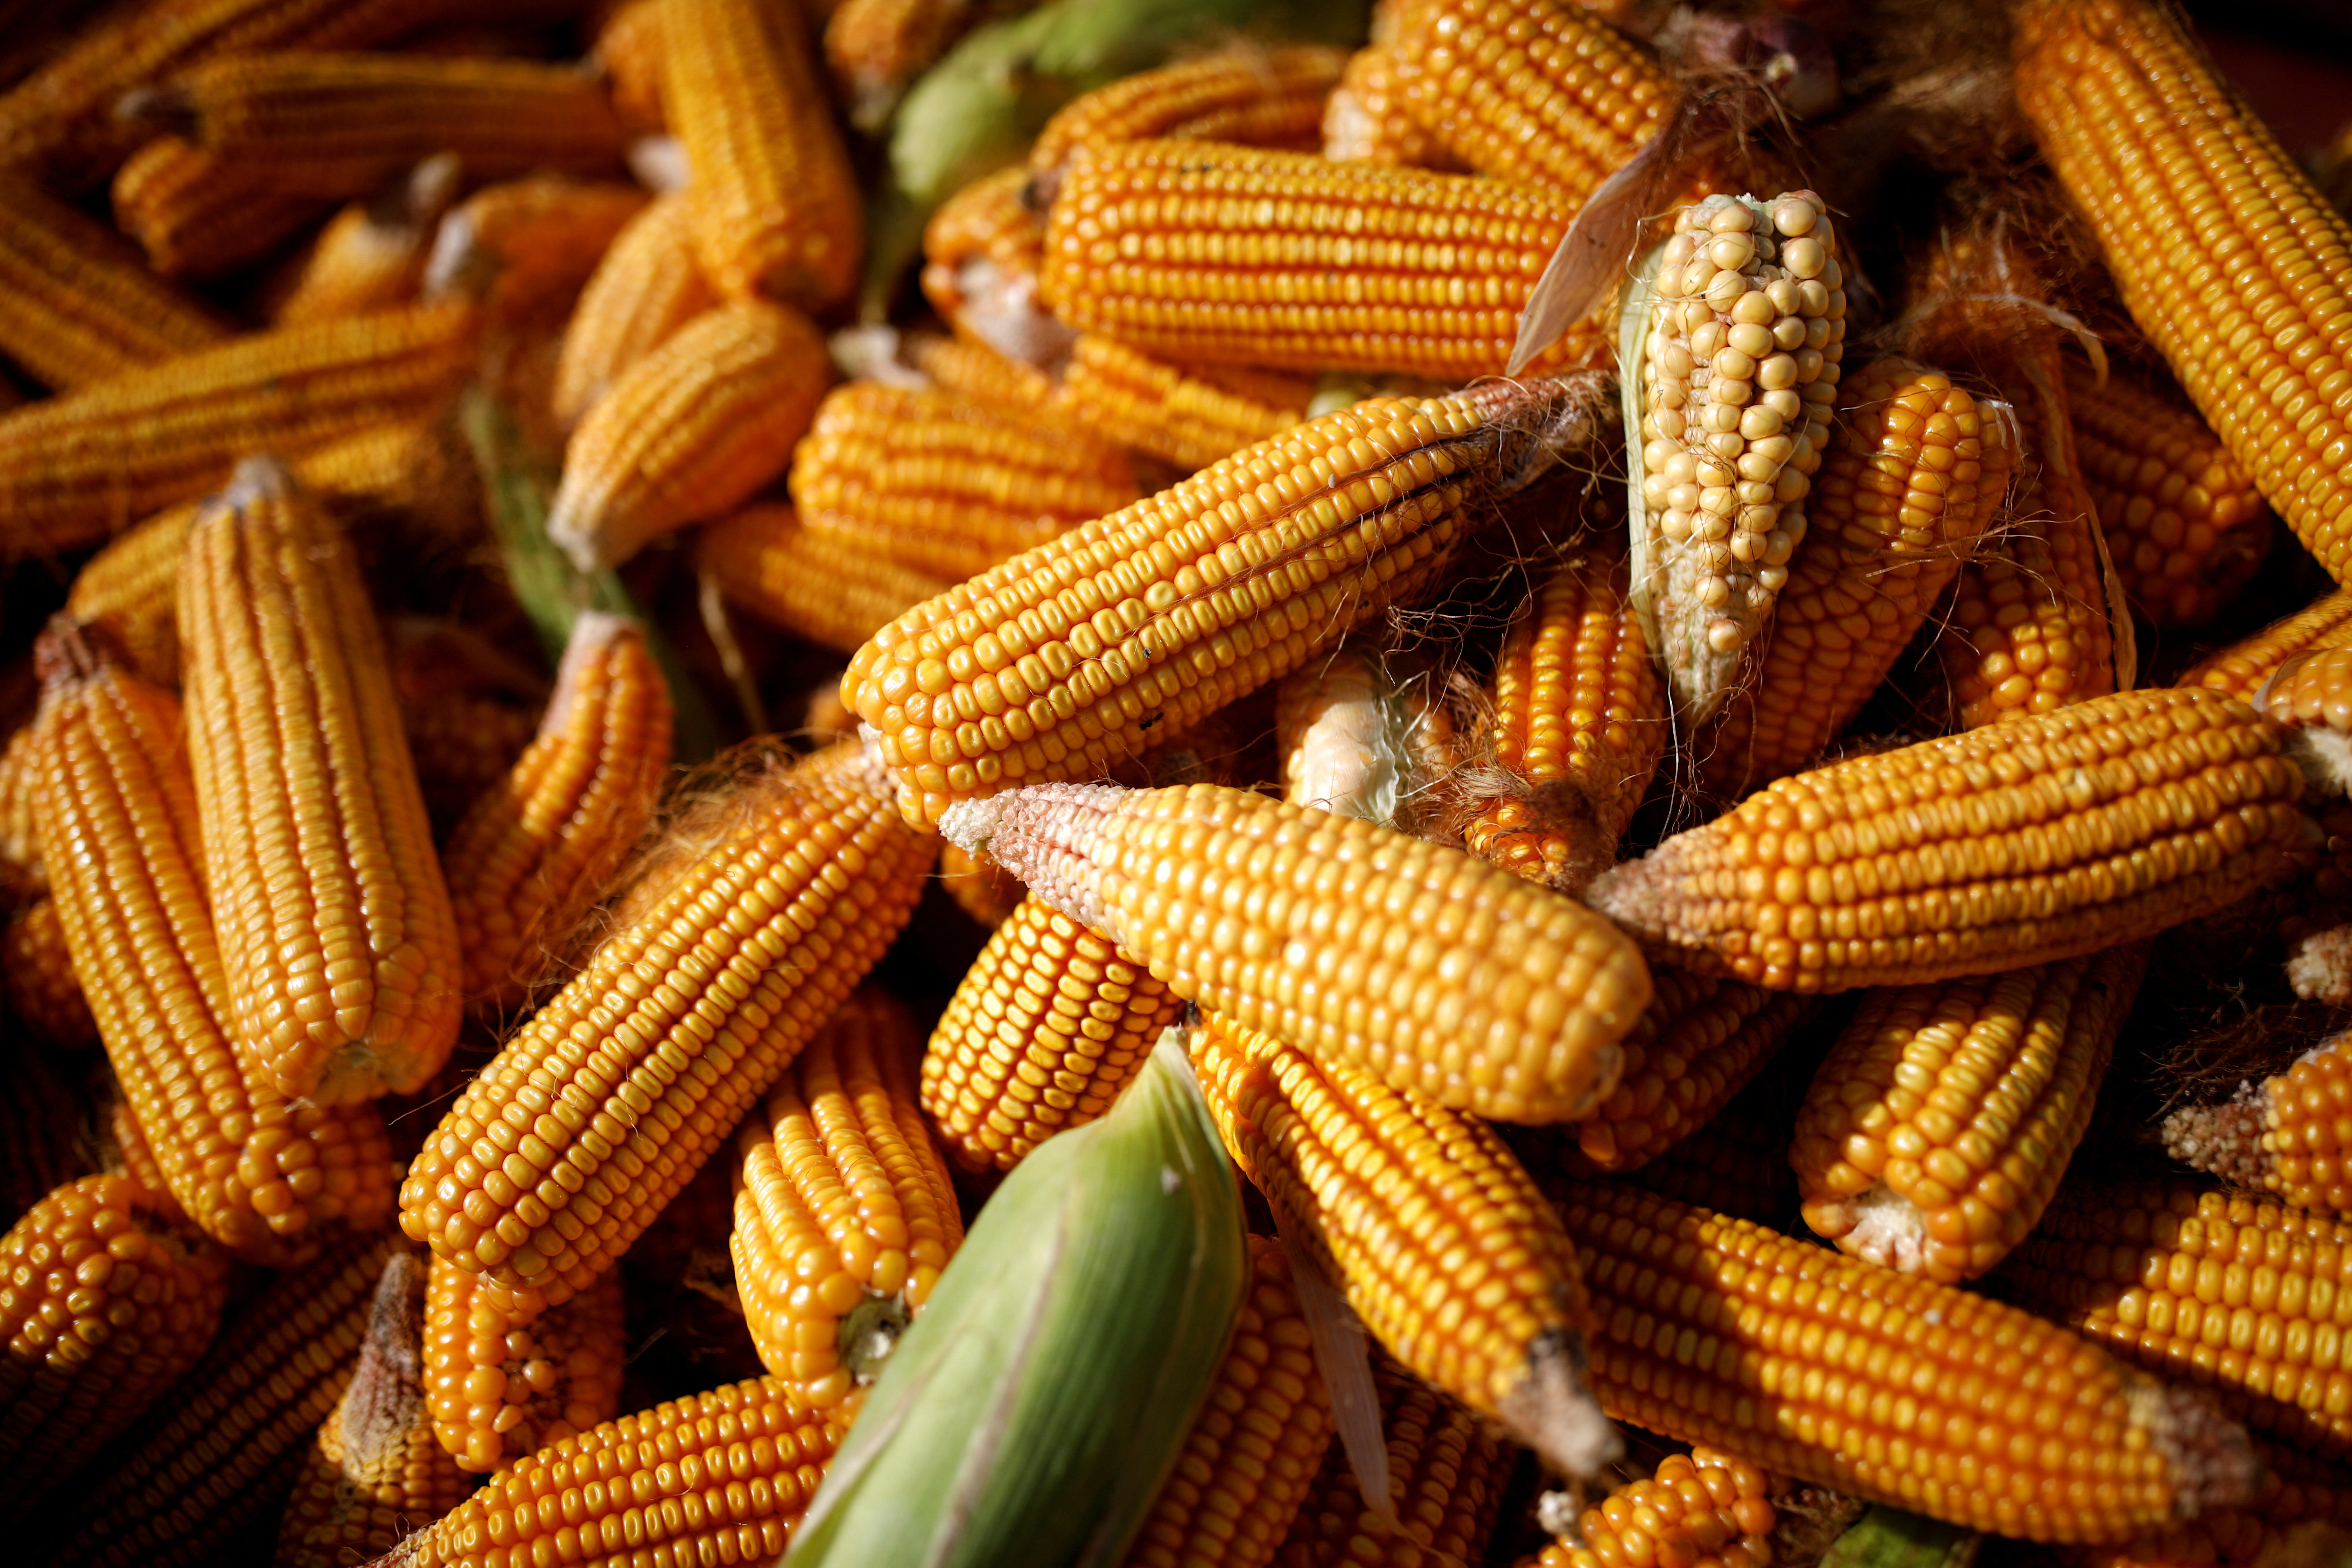 Corn is piled in the back of a vehicle in a field on the outskirts of Jiayuguan